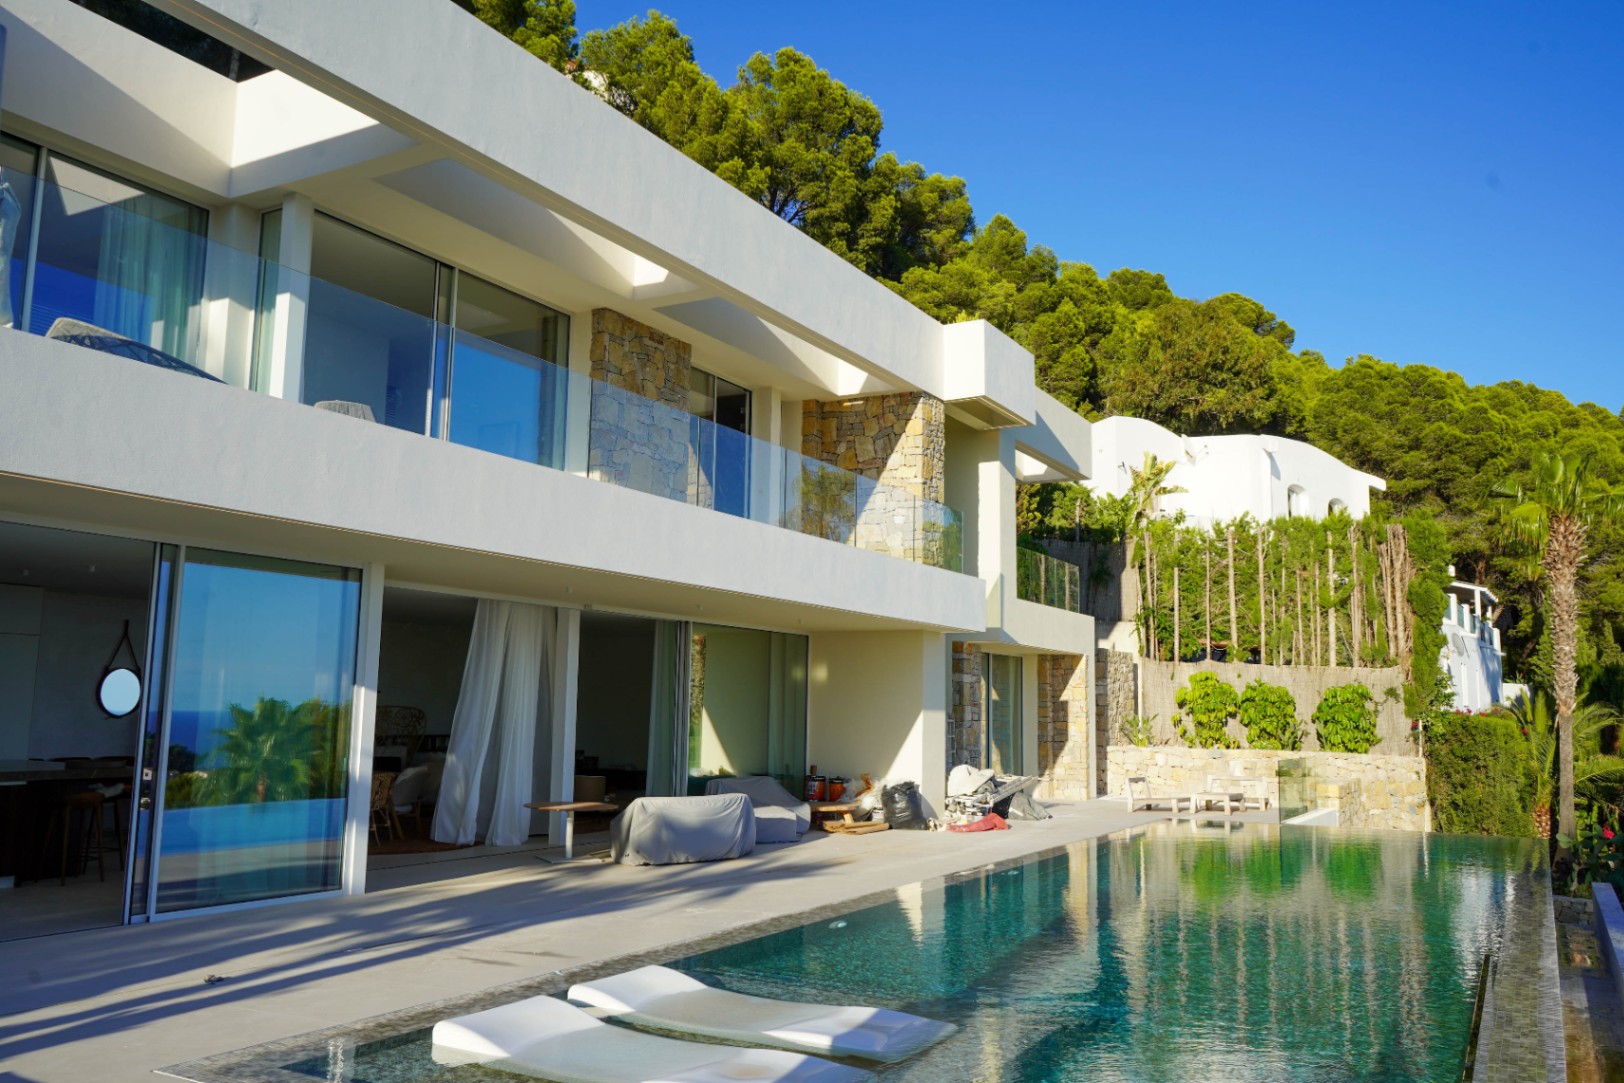 SPECTACULAR VILLA WITH ALL THE LUXURIES BUILT AND SOLD BY GH COSTA BLANCA